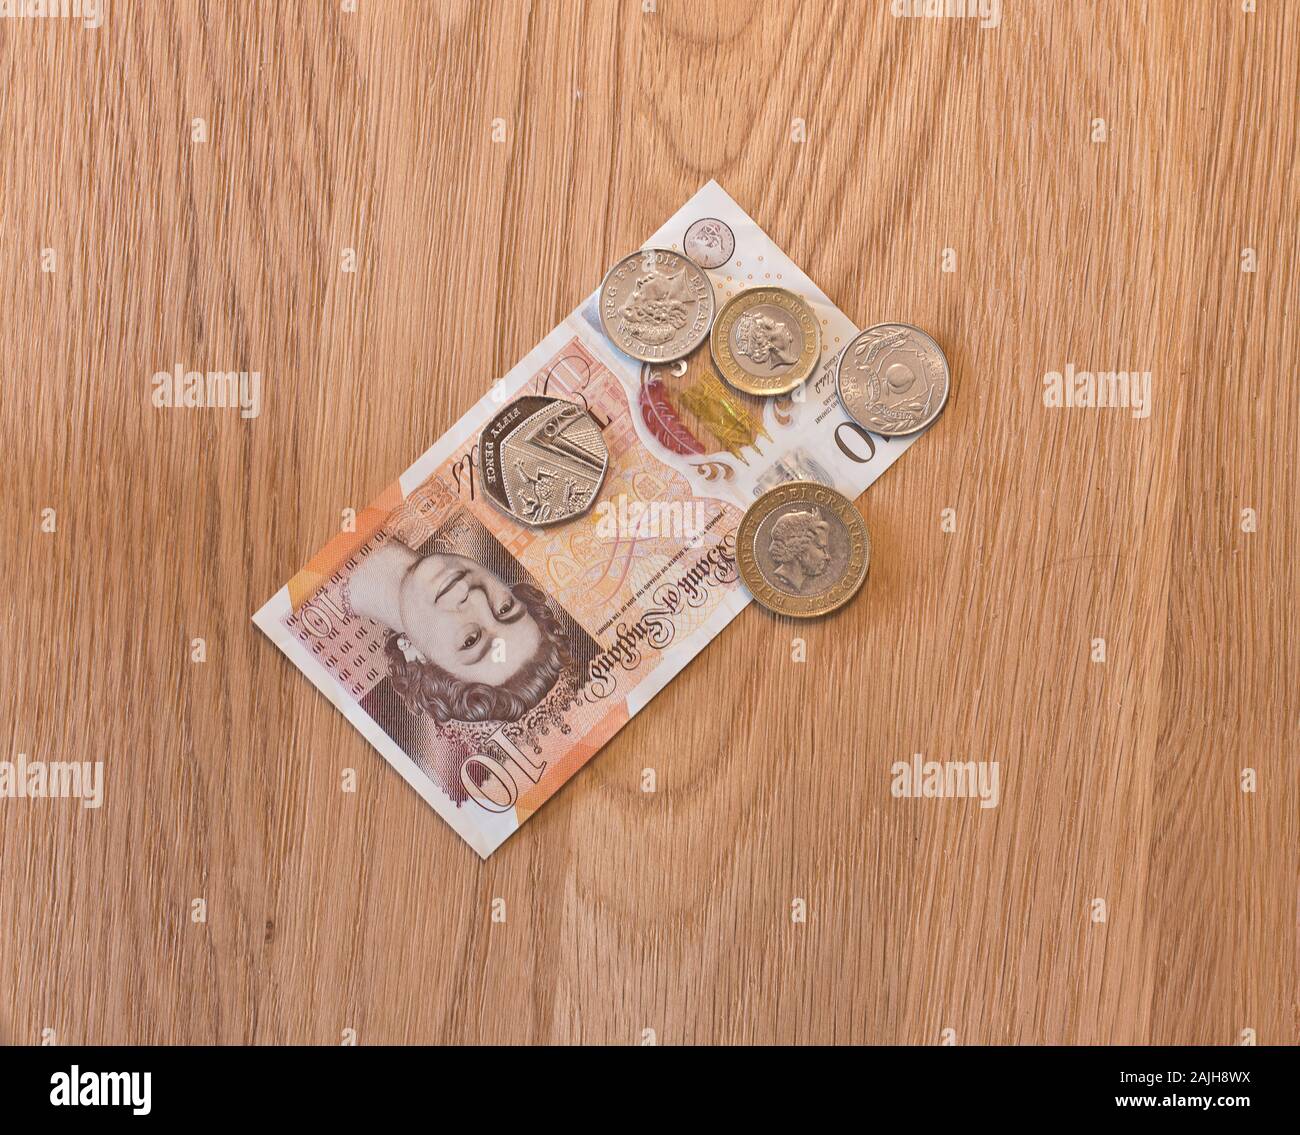 British currency notes and coins placed on a wooden background Stock Photo